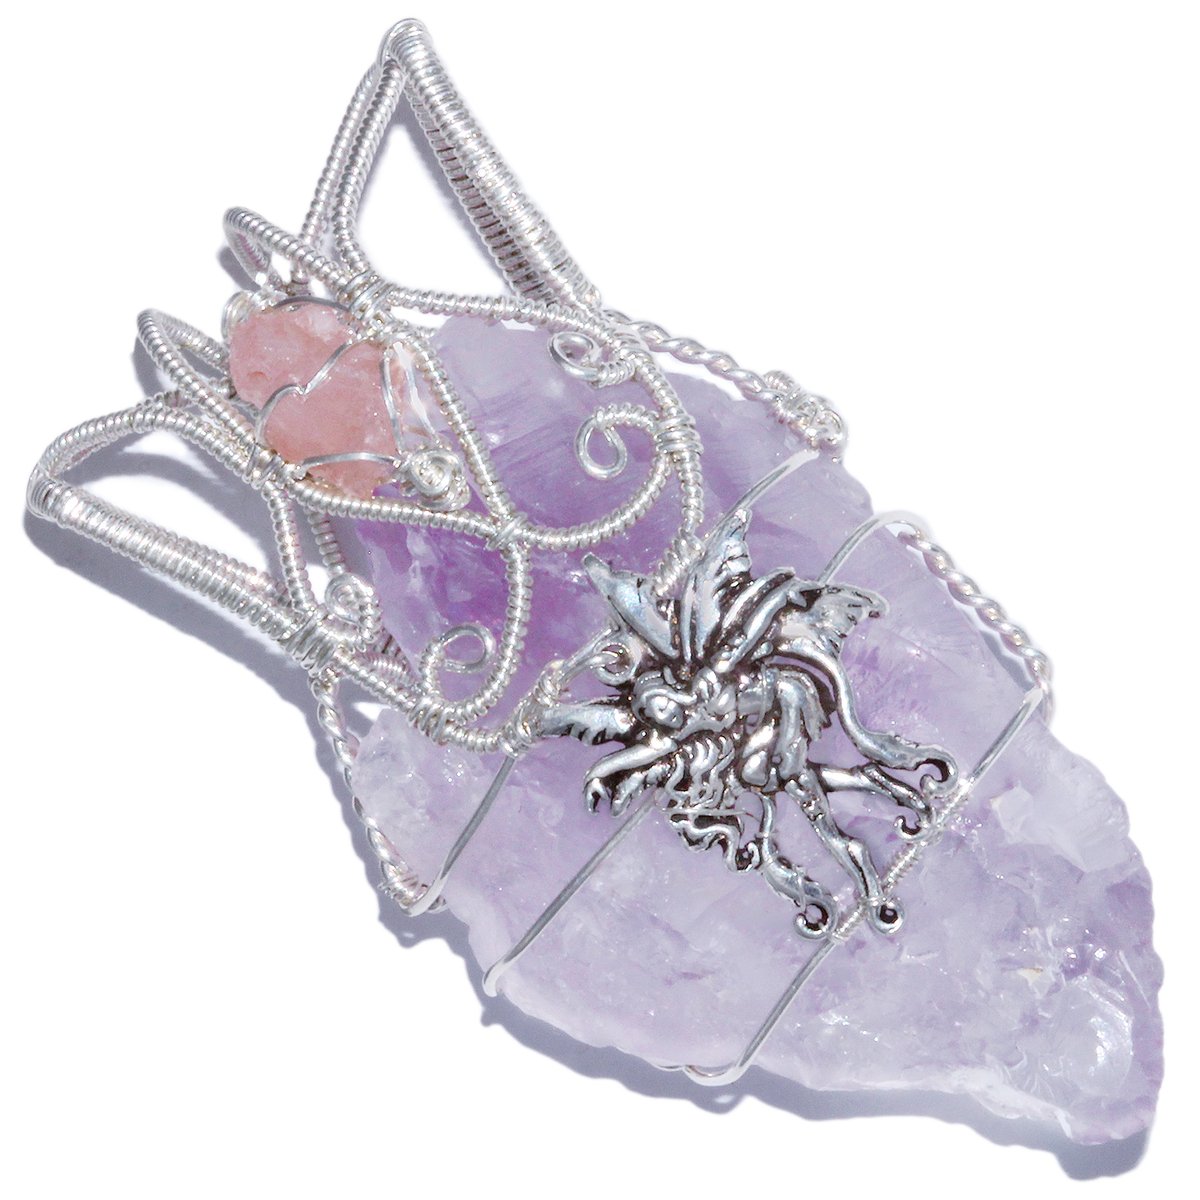 Etched Lavender Amethyst Crystal Pendant with Fairy and Nirvana Quartz 